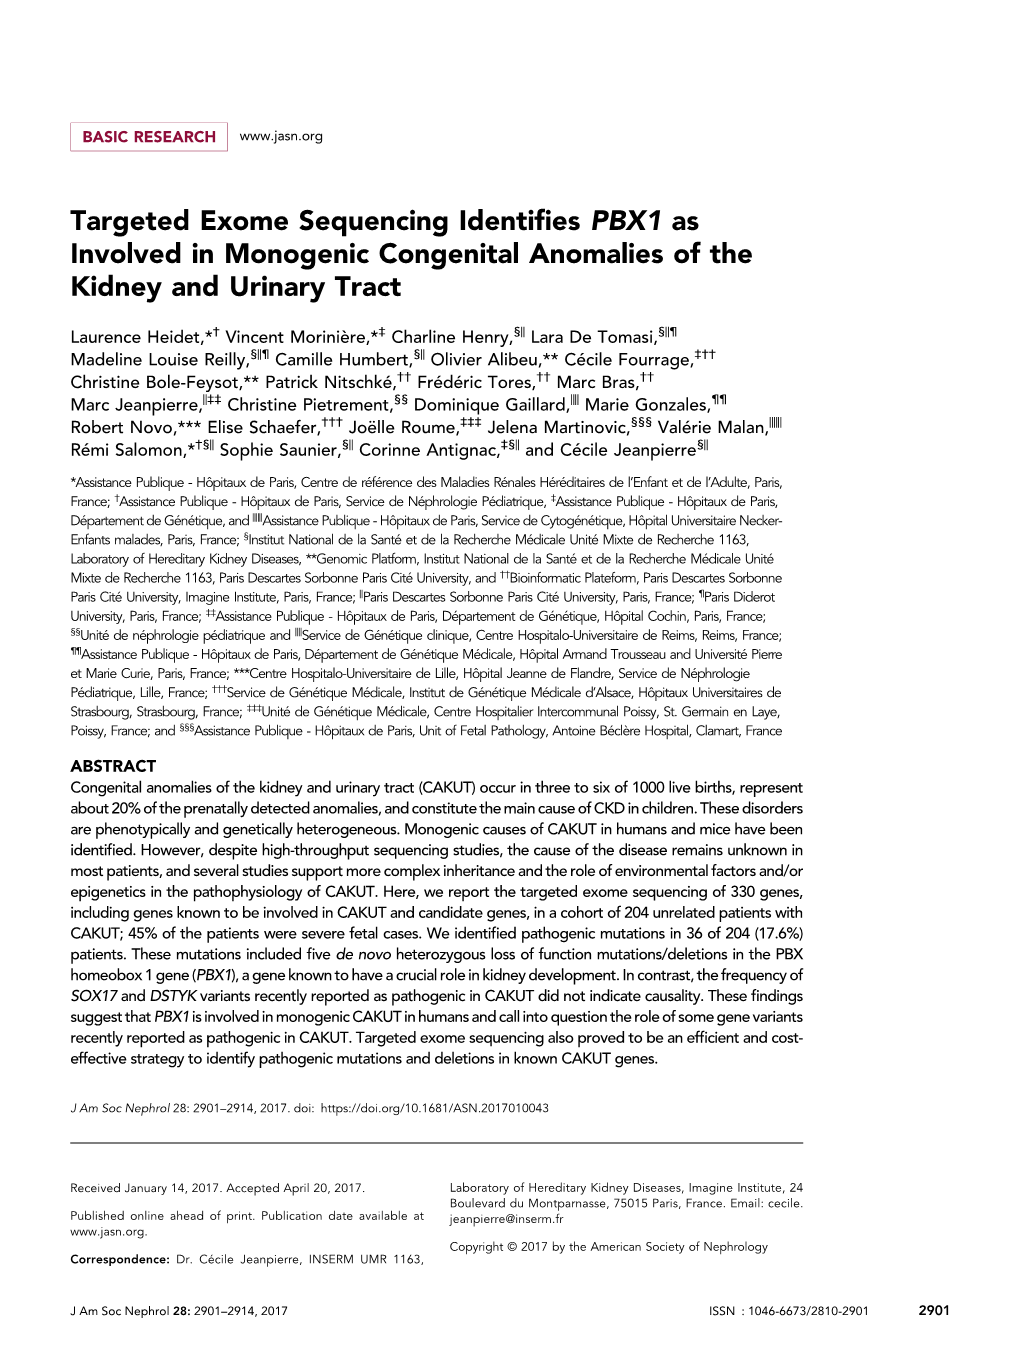 Targeted Exome Sequencing Identifies PBX1 As Involved